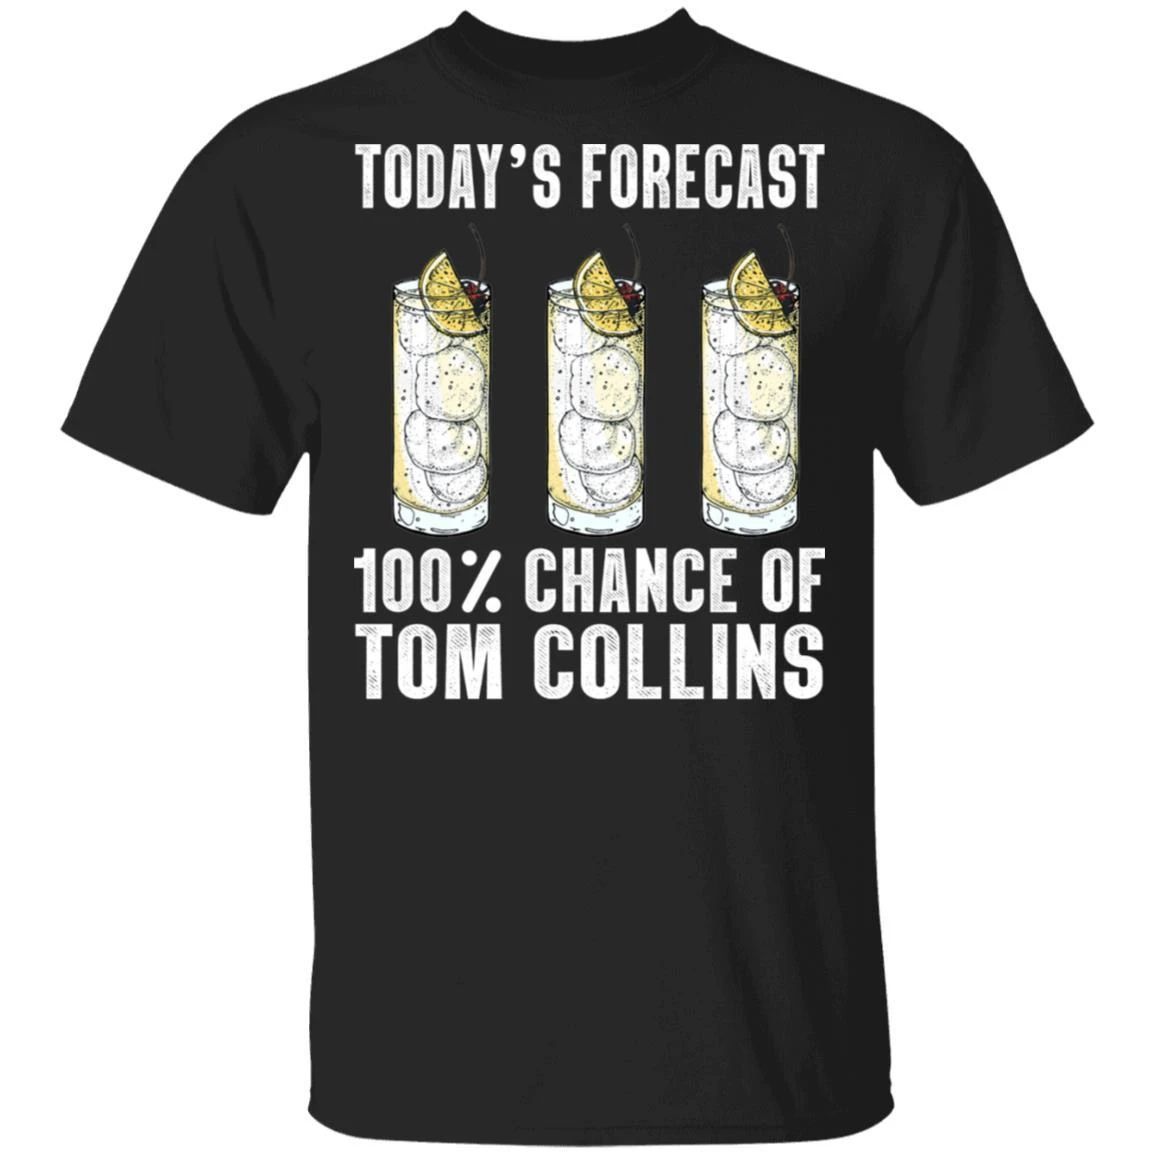 Today’s Forecast 100% Tom Collins T-shirt Cocktail Tee